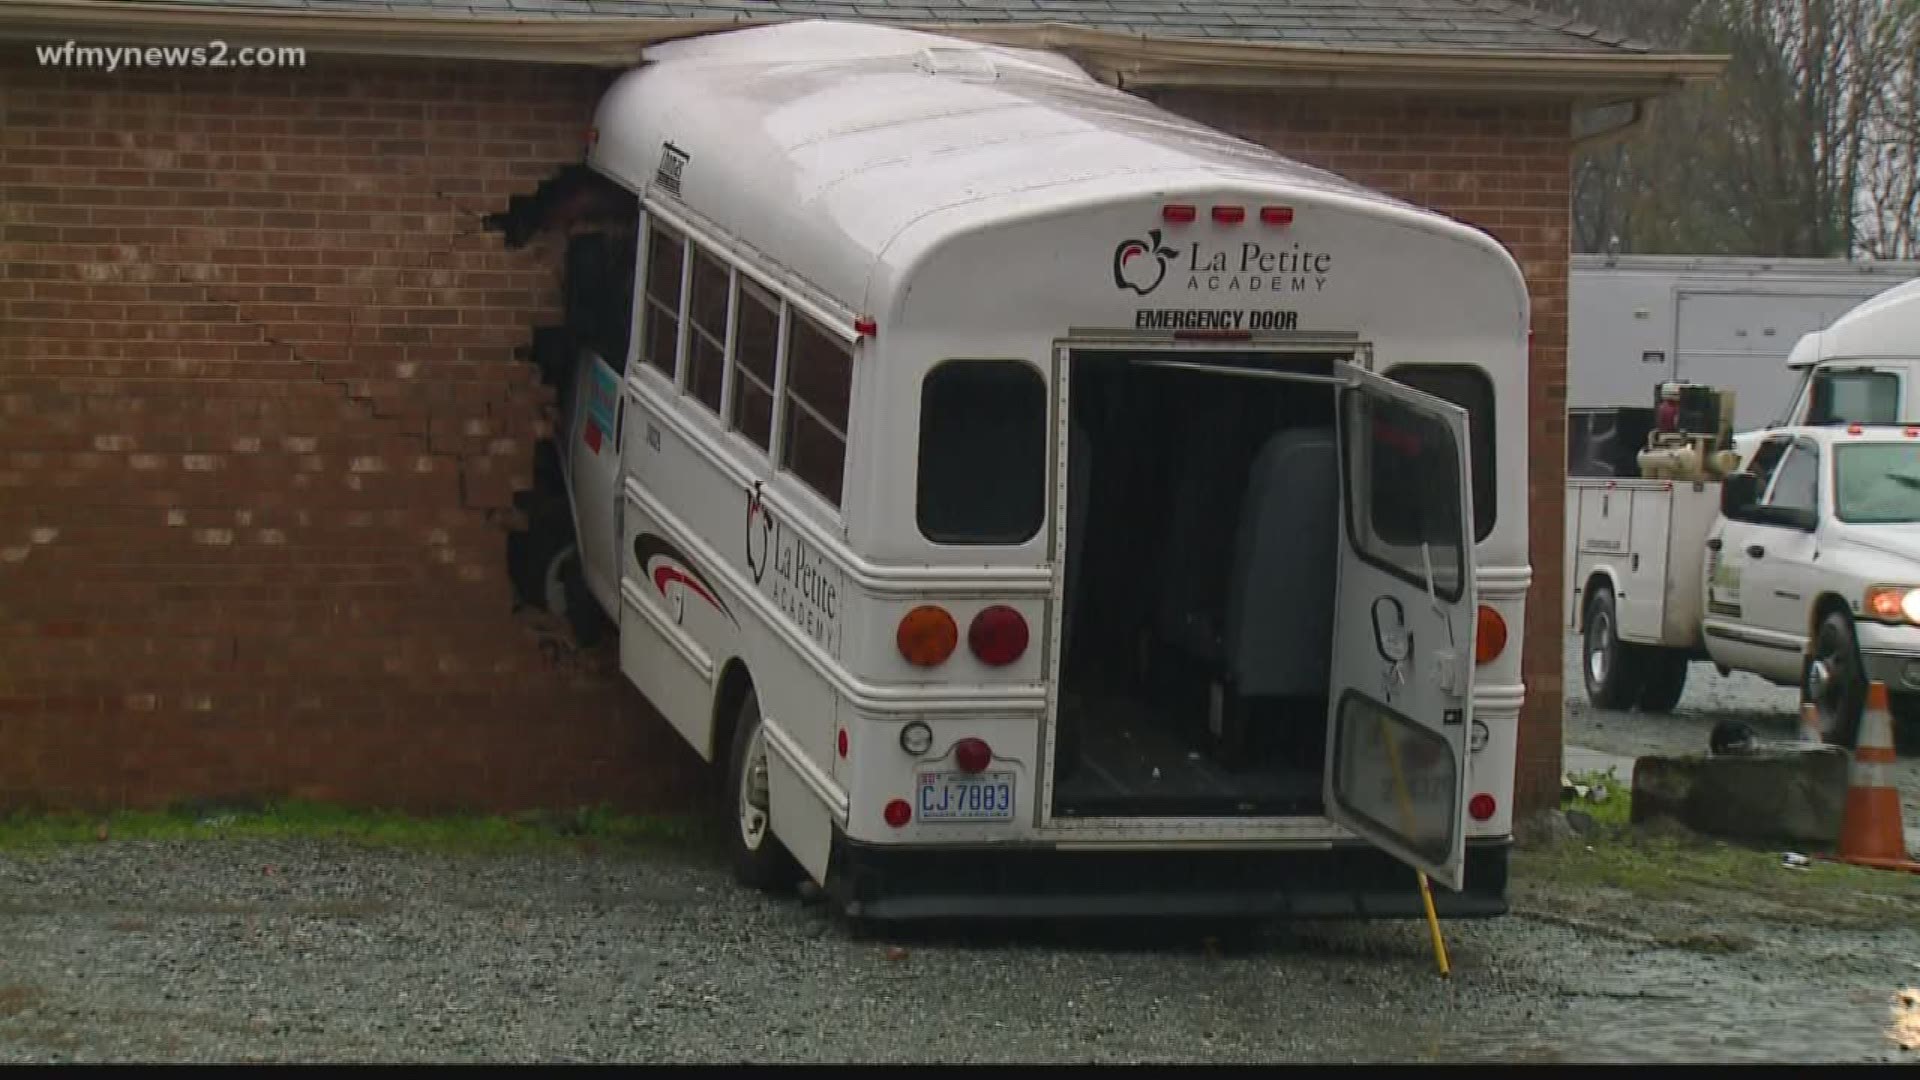 Bus carrying kids crashes into building. Neighbors say accidents happen all the time on that road